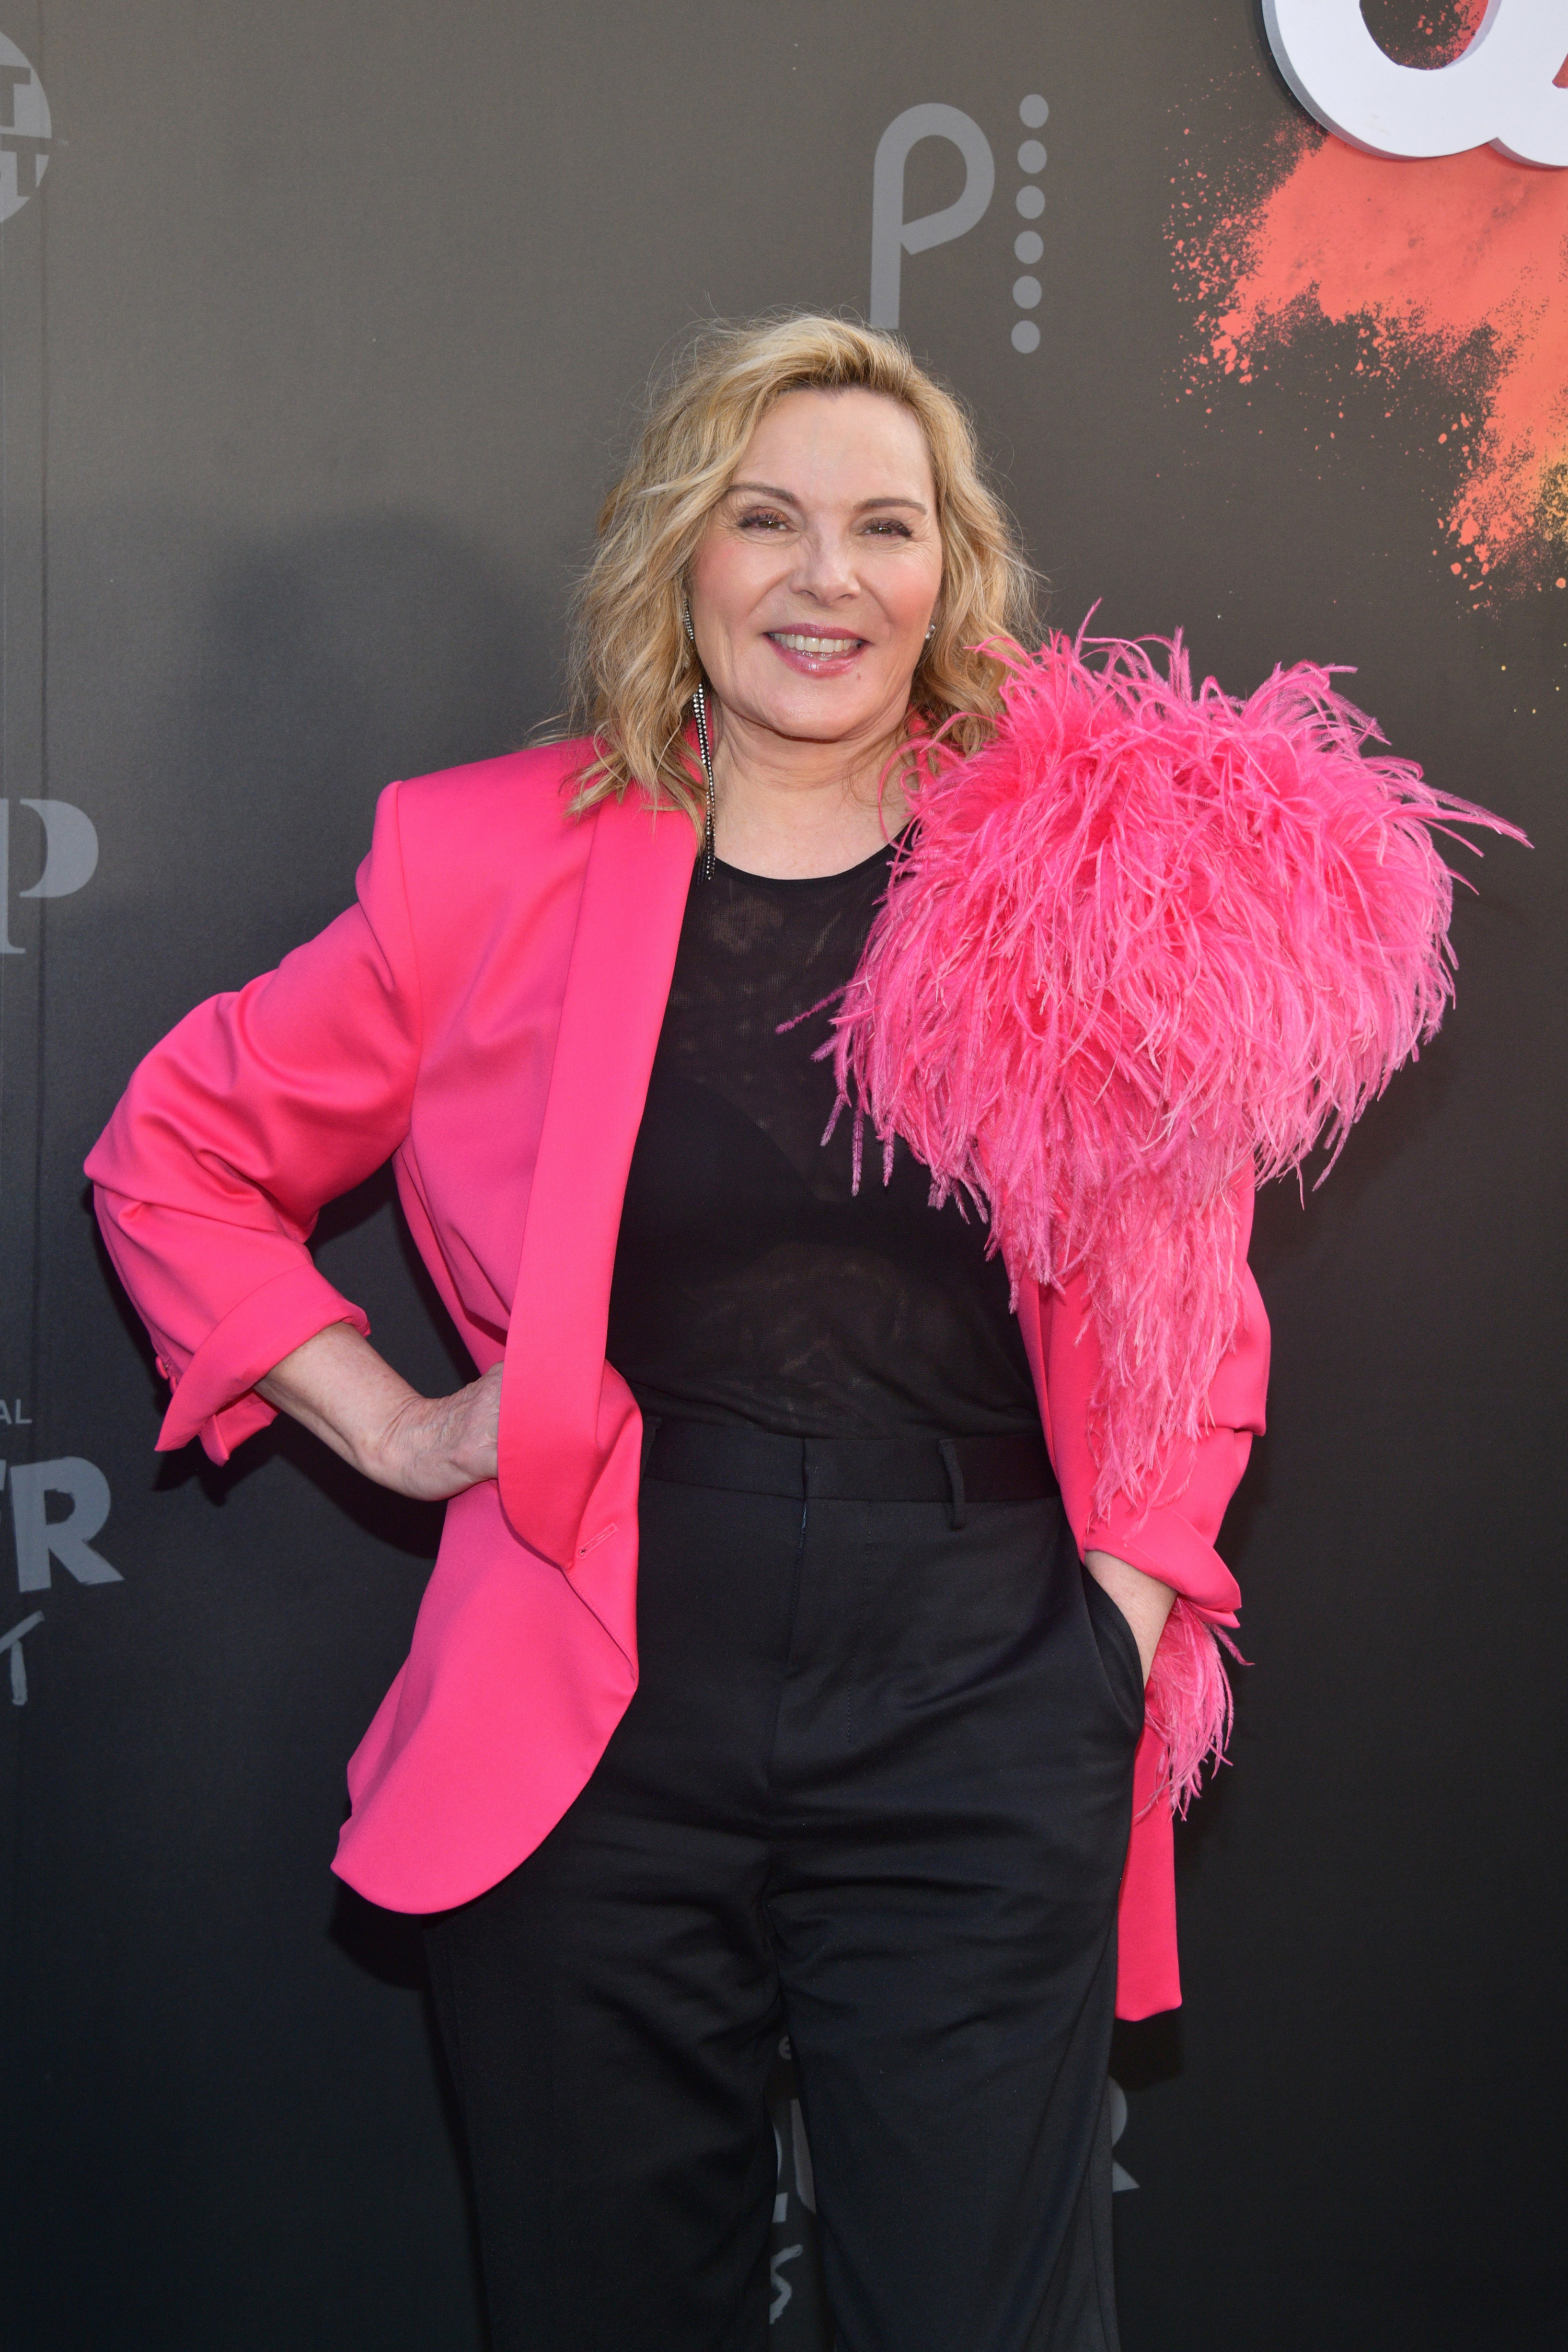 Kim Cattrall smiling at an event